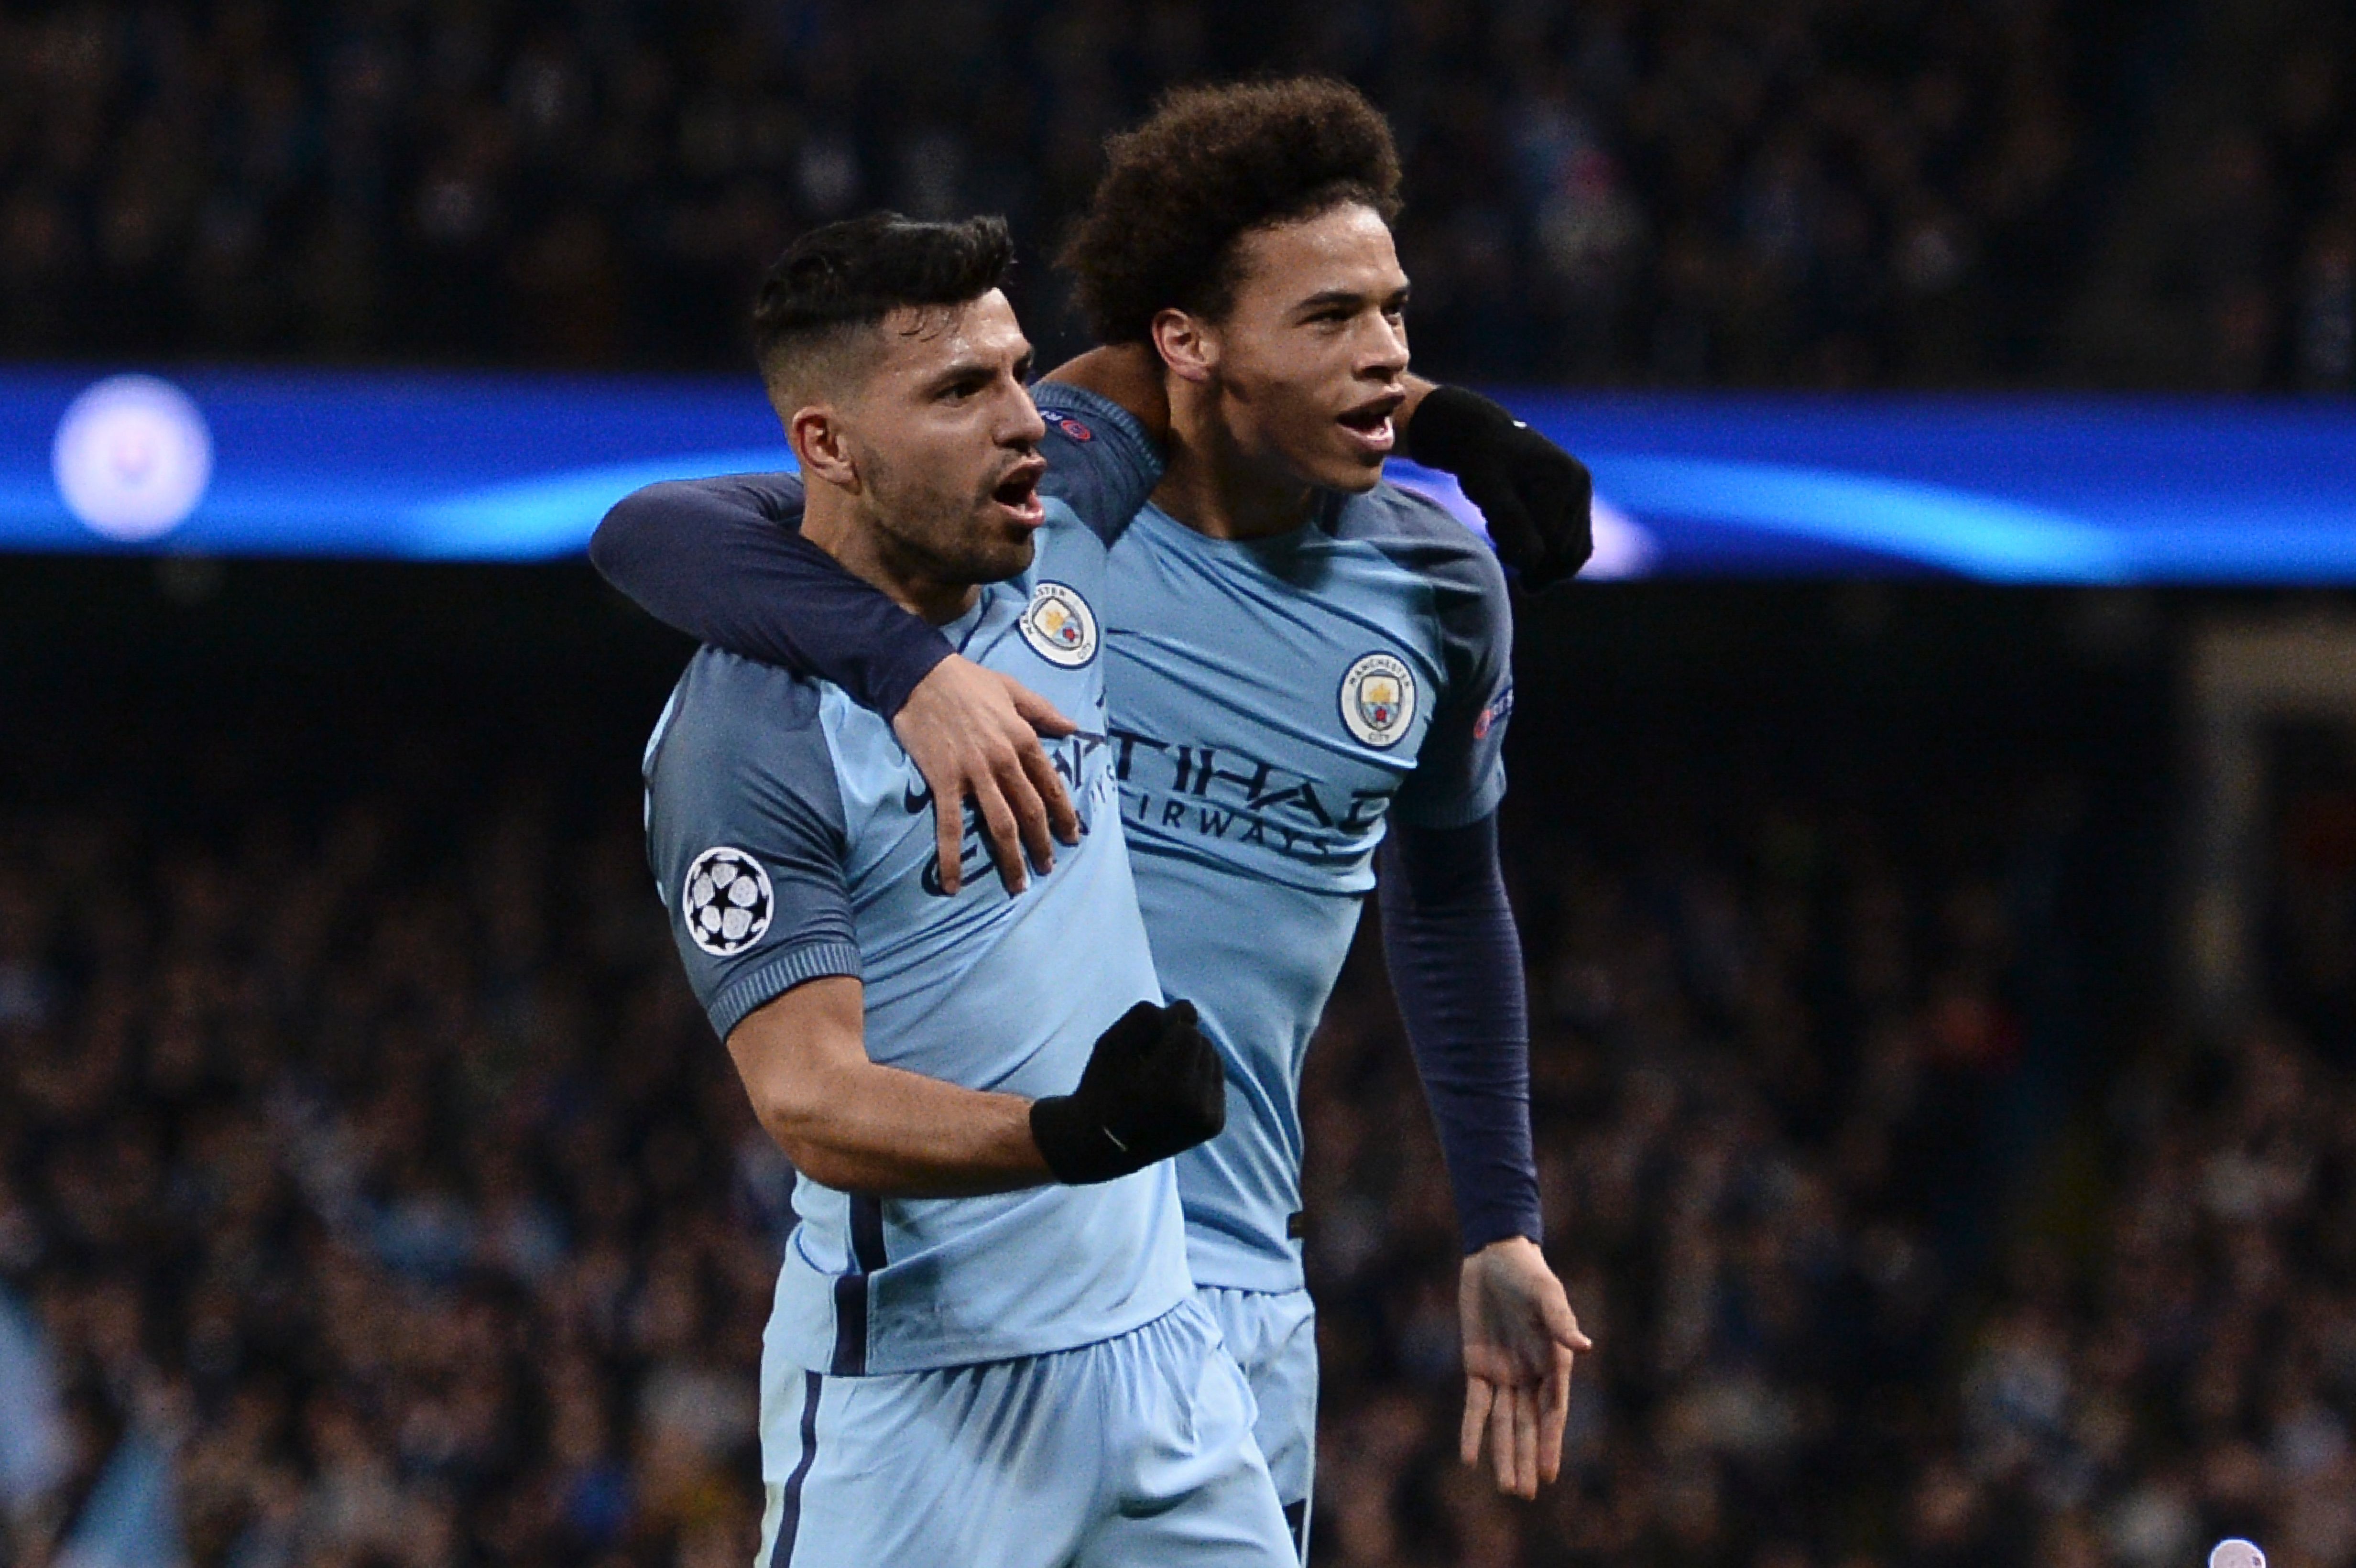 Manchester City's Argentinian striker Sergio Aguero (L) celebrates scoring their second goal with Manchester City's German midfielder Leroy Sane (R) during the UEFA Champions League Round of 16 first-leg football match between Manchester City and Monaco at the Etihad Stadium in Manchester, north west England on February 21, 2017. / AFP / Oli SCARFF        (Photo credit should read OLI SCARFF/AFP/Getty Images)